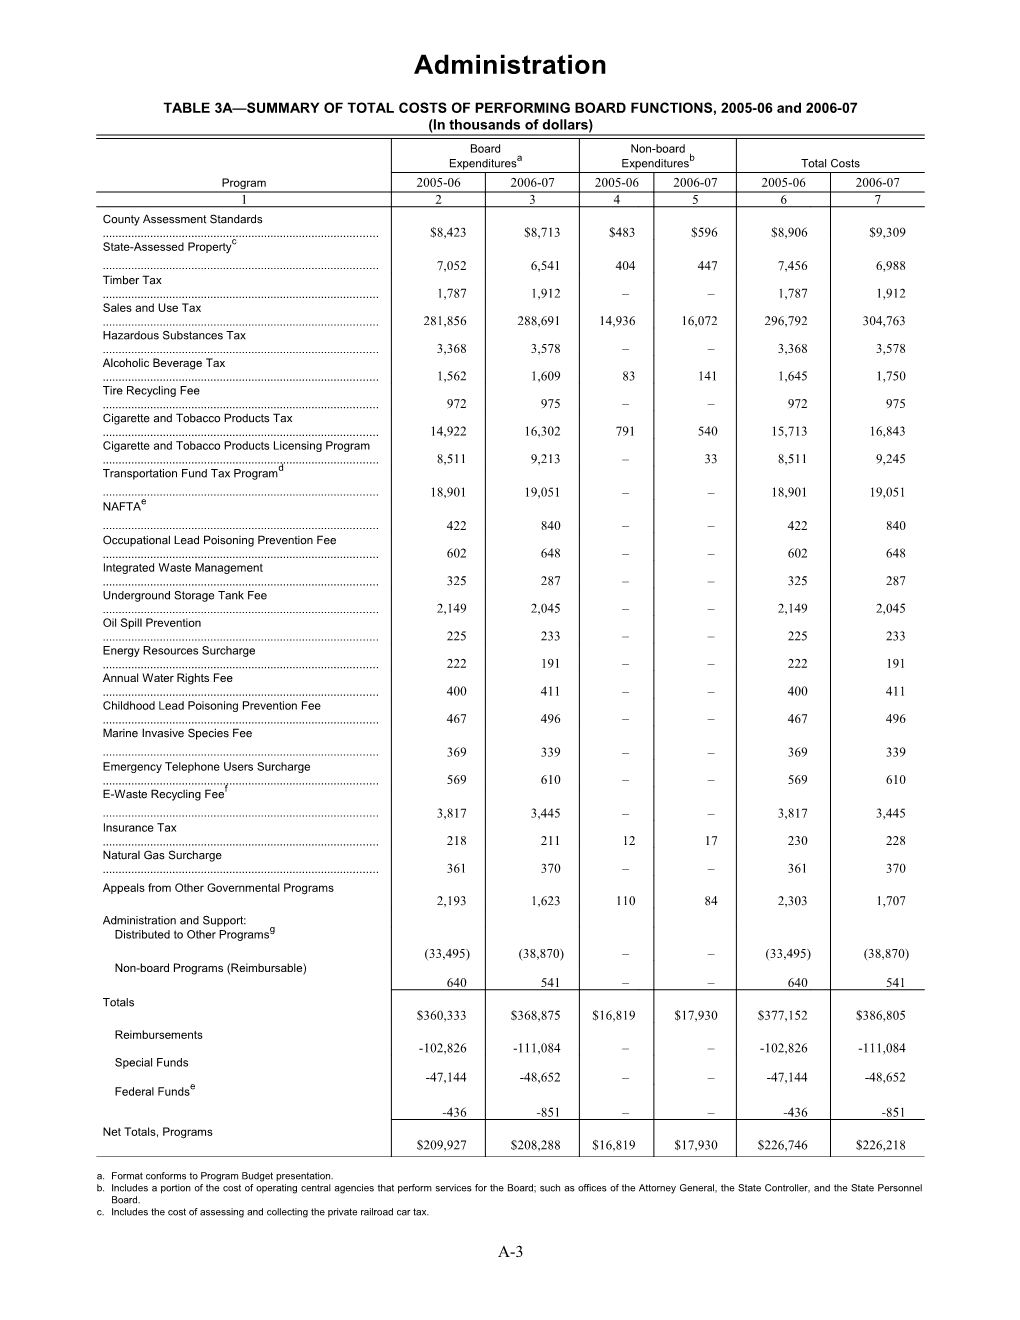 TABLE 3A SUMMARY of TOTAL COSTS of PERFORMING BOARD FUNCTIONS, 2005-06 and 2006-07